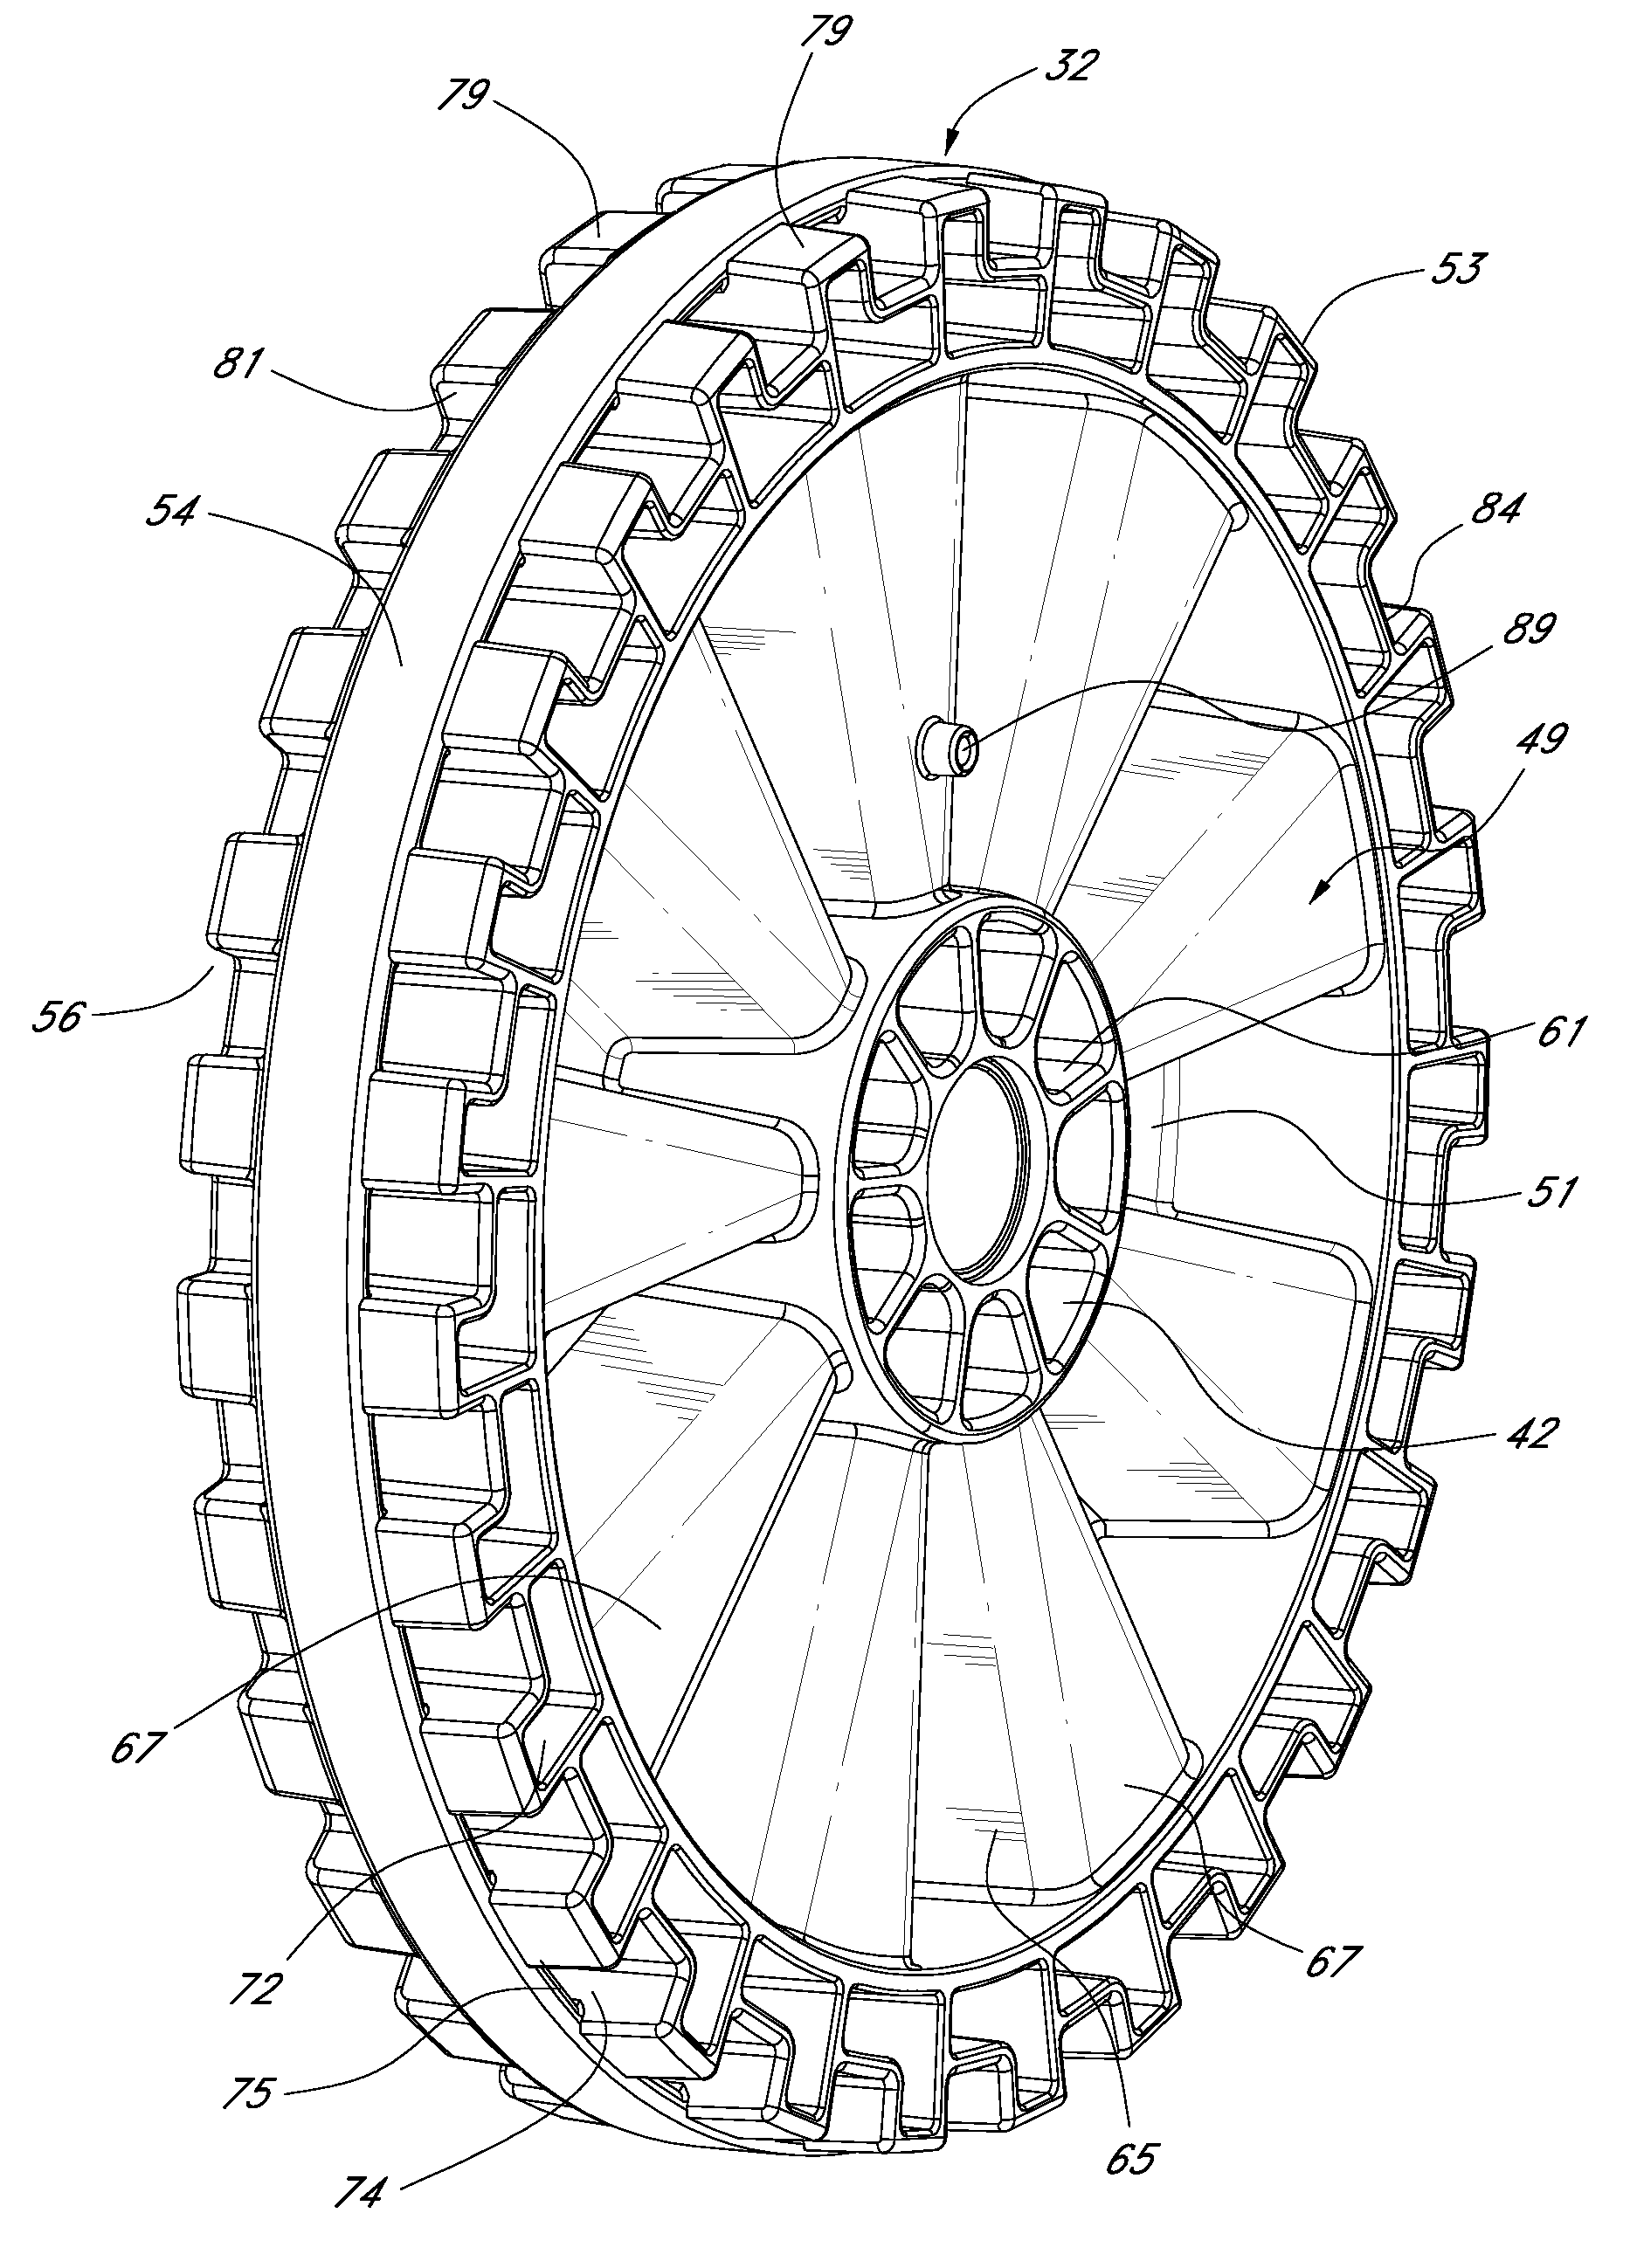 Injection-molded wheel having a plurality of recesses in a rim portion